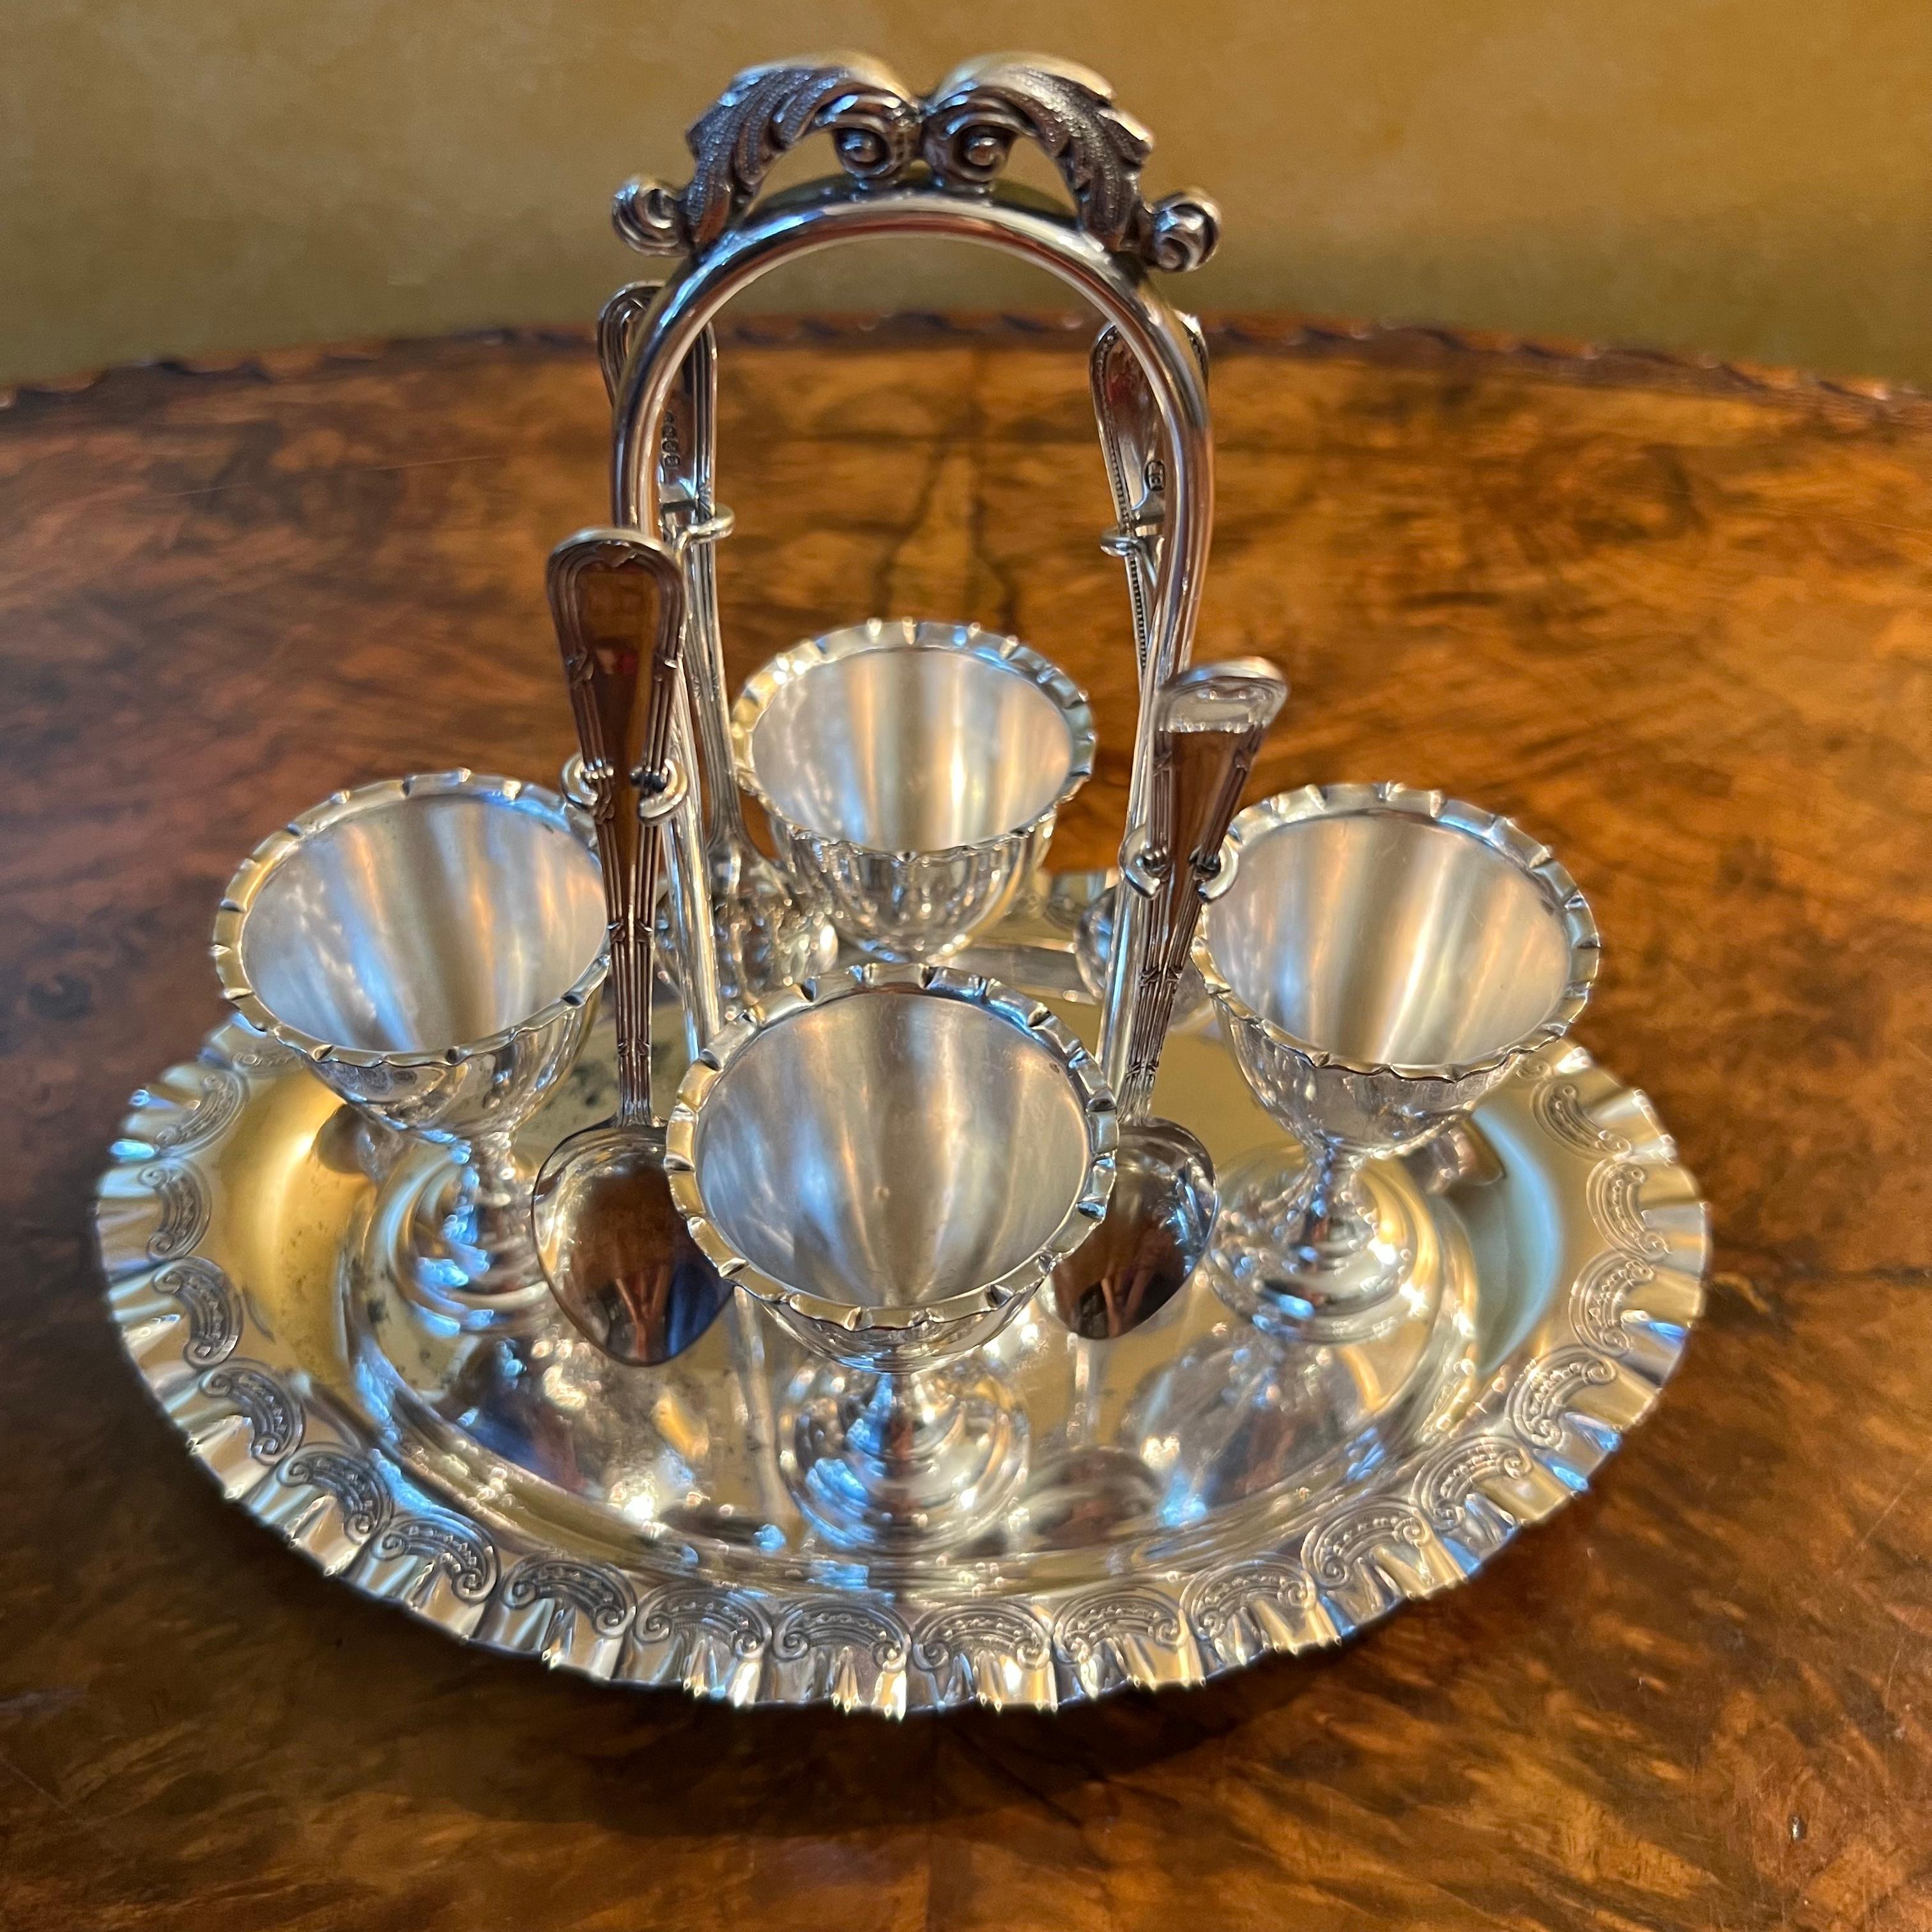 Set of four cups and four spoons, spoons are not all the same. there is marks and ware to the tray, there is slight ware to cups from age and use

Material: Silver Plated

Measurements:  18cm high, 21cm length, 13cm width

Country of Origin: England